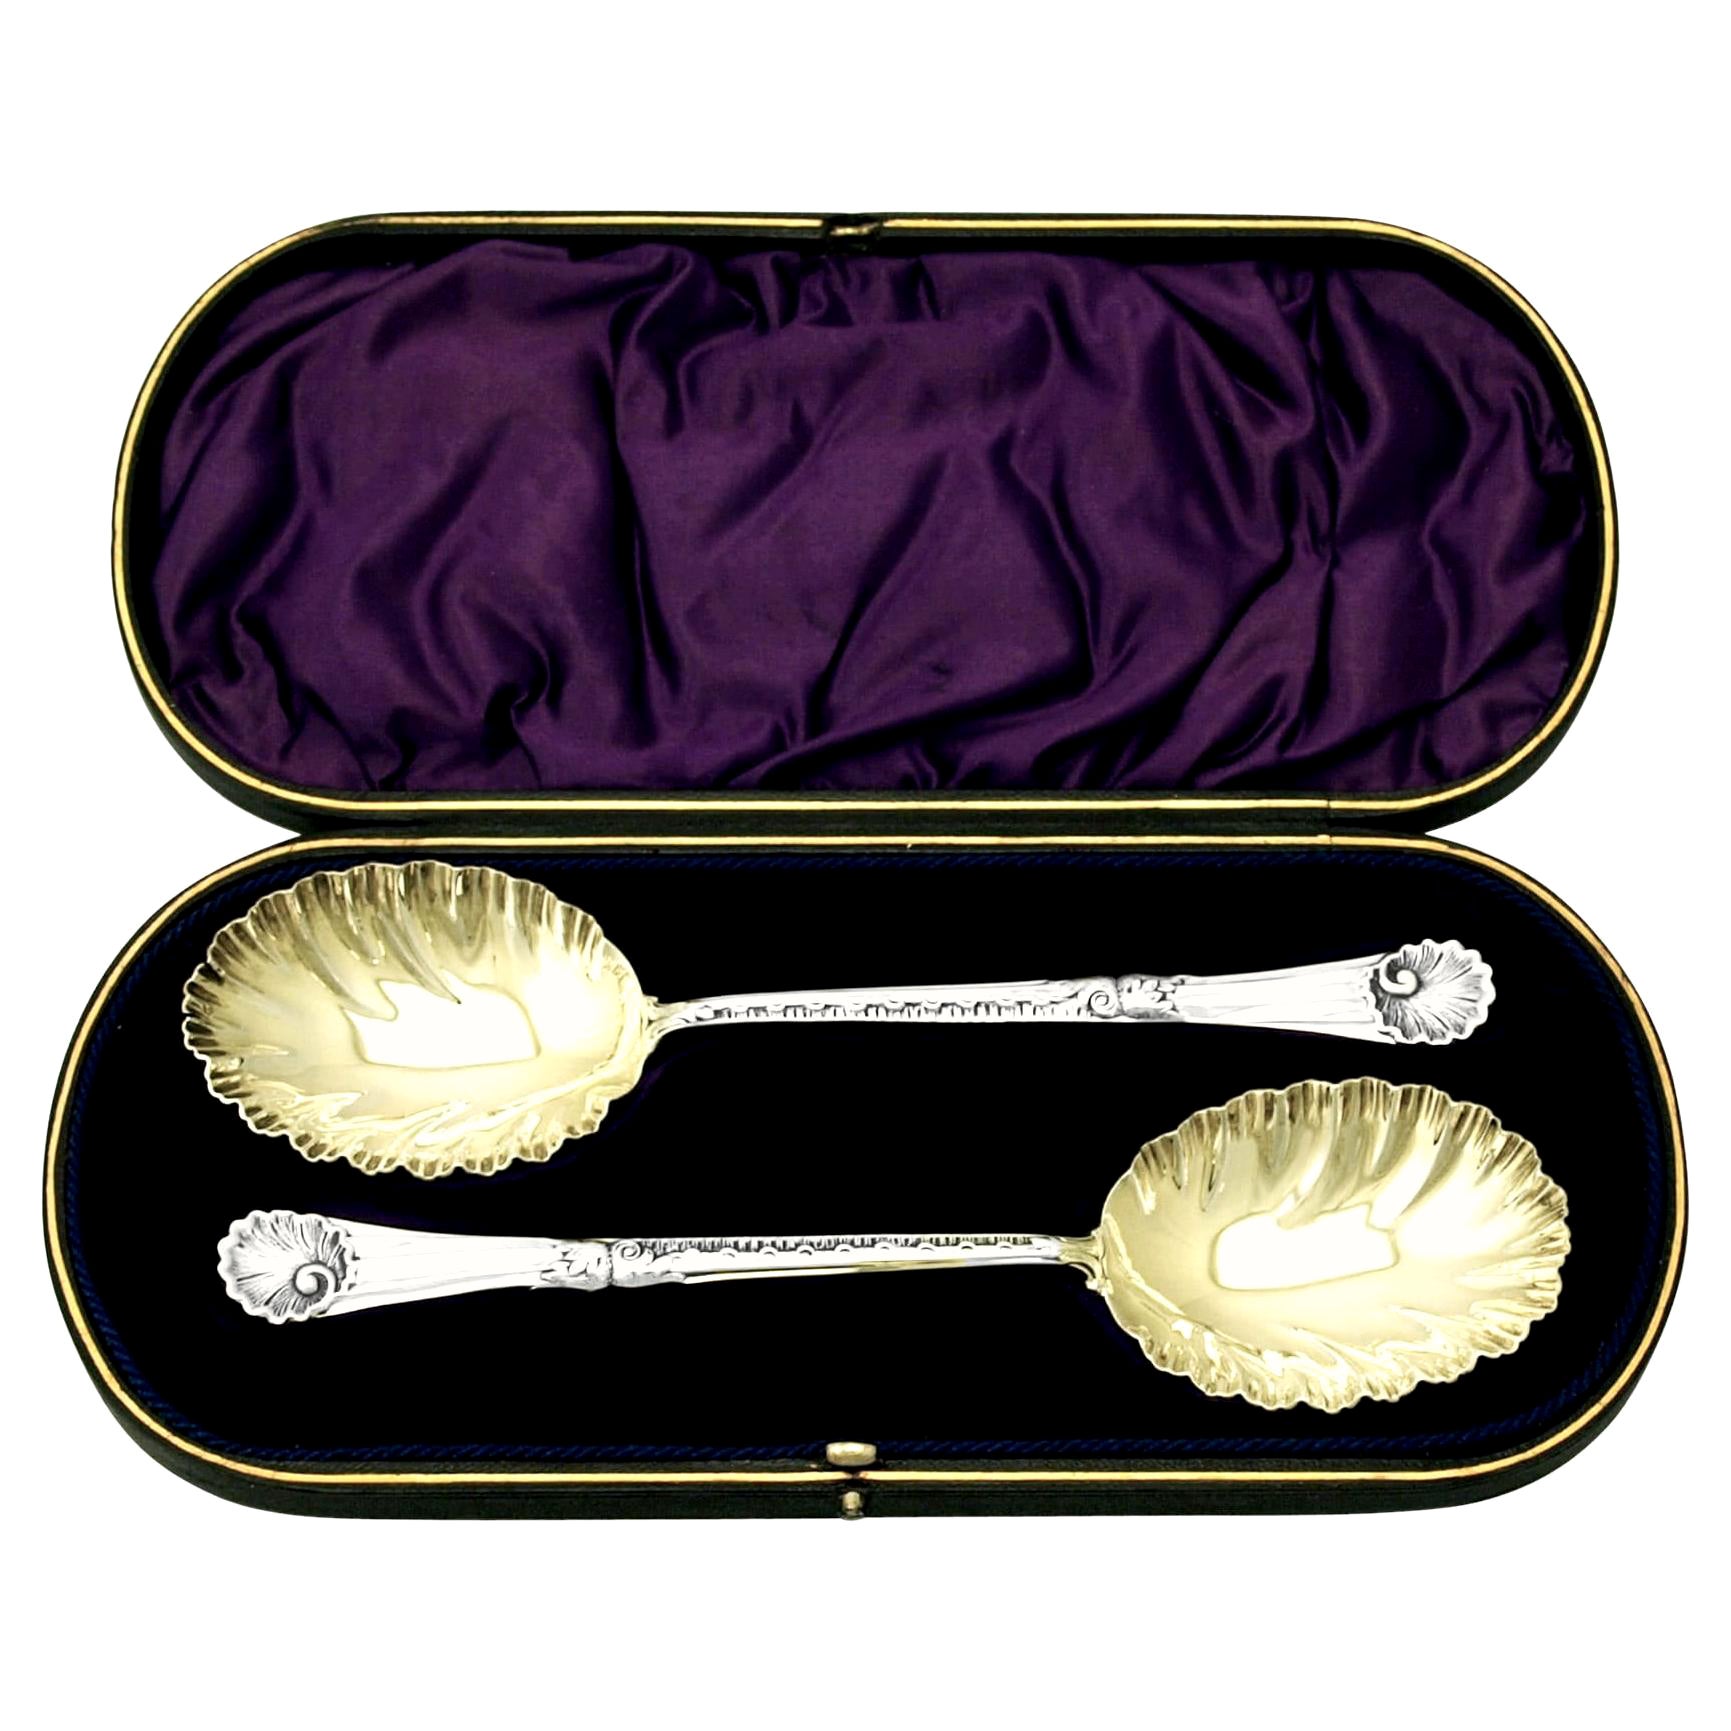 1898 Victorian English Sterling Silver Fruit Spoons  For Sale